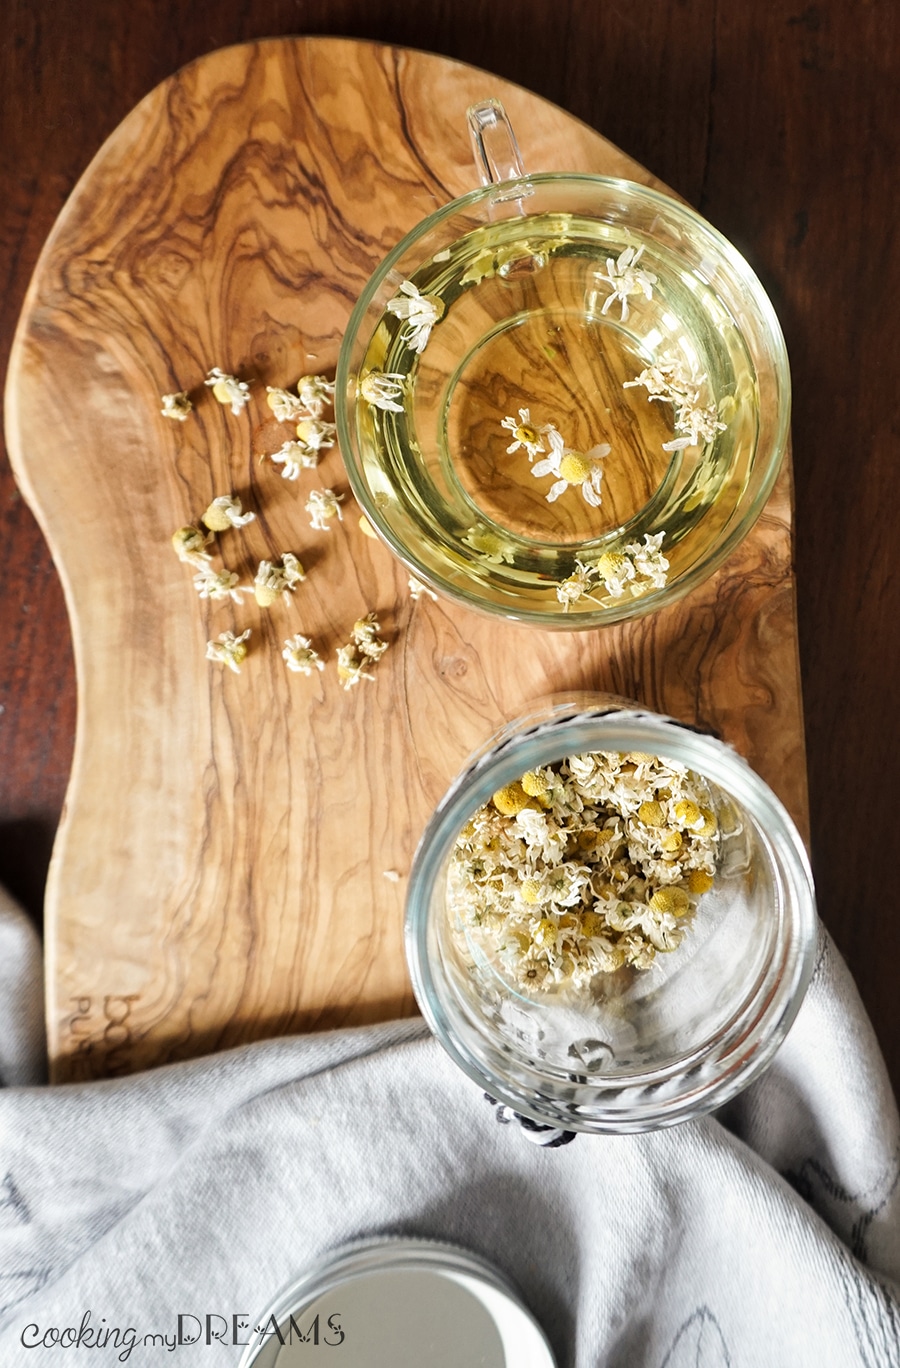 How to grow, dry and make homemade Chamomile - Cooking My Dreams